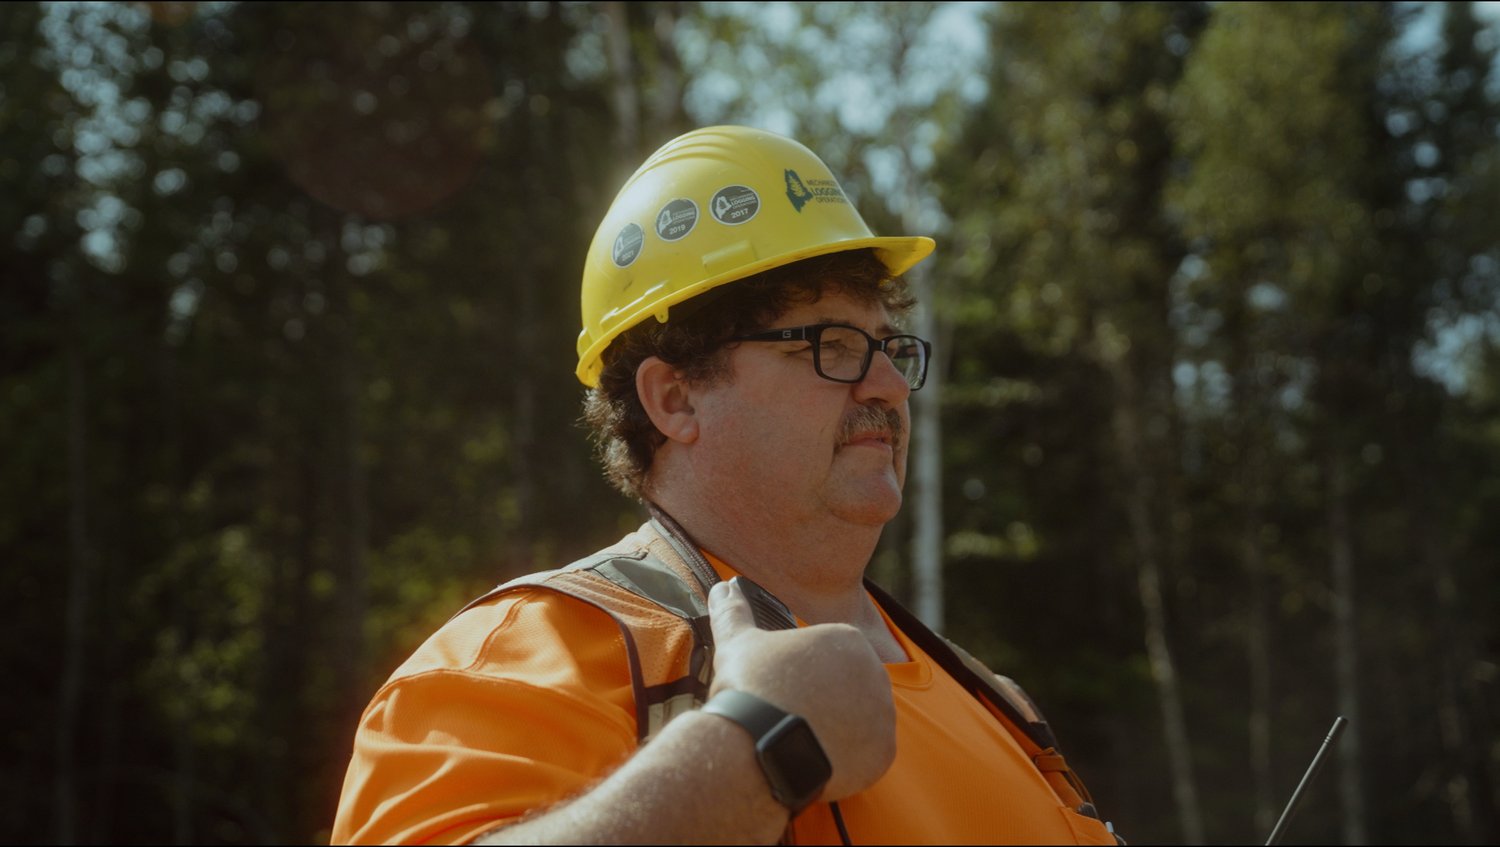 Staying Safe in the Woods with Safety Coordinator Donald Burr